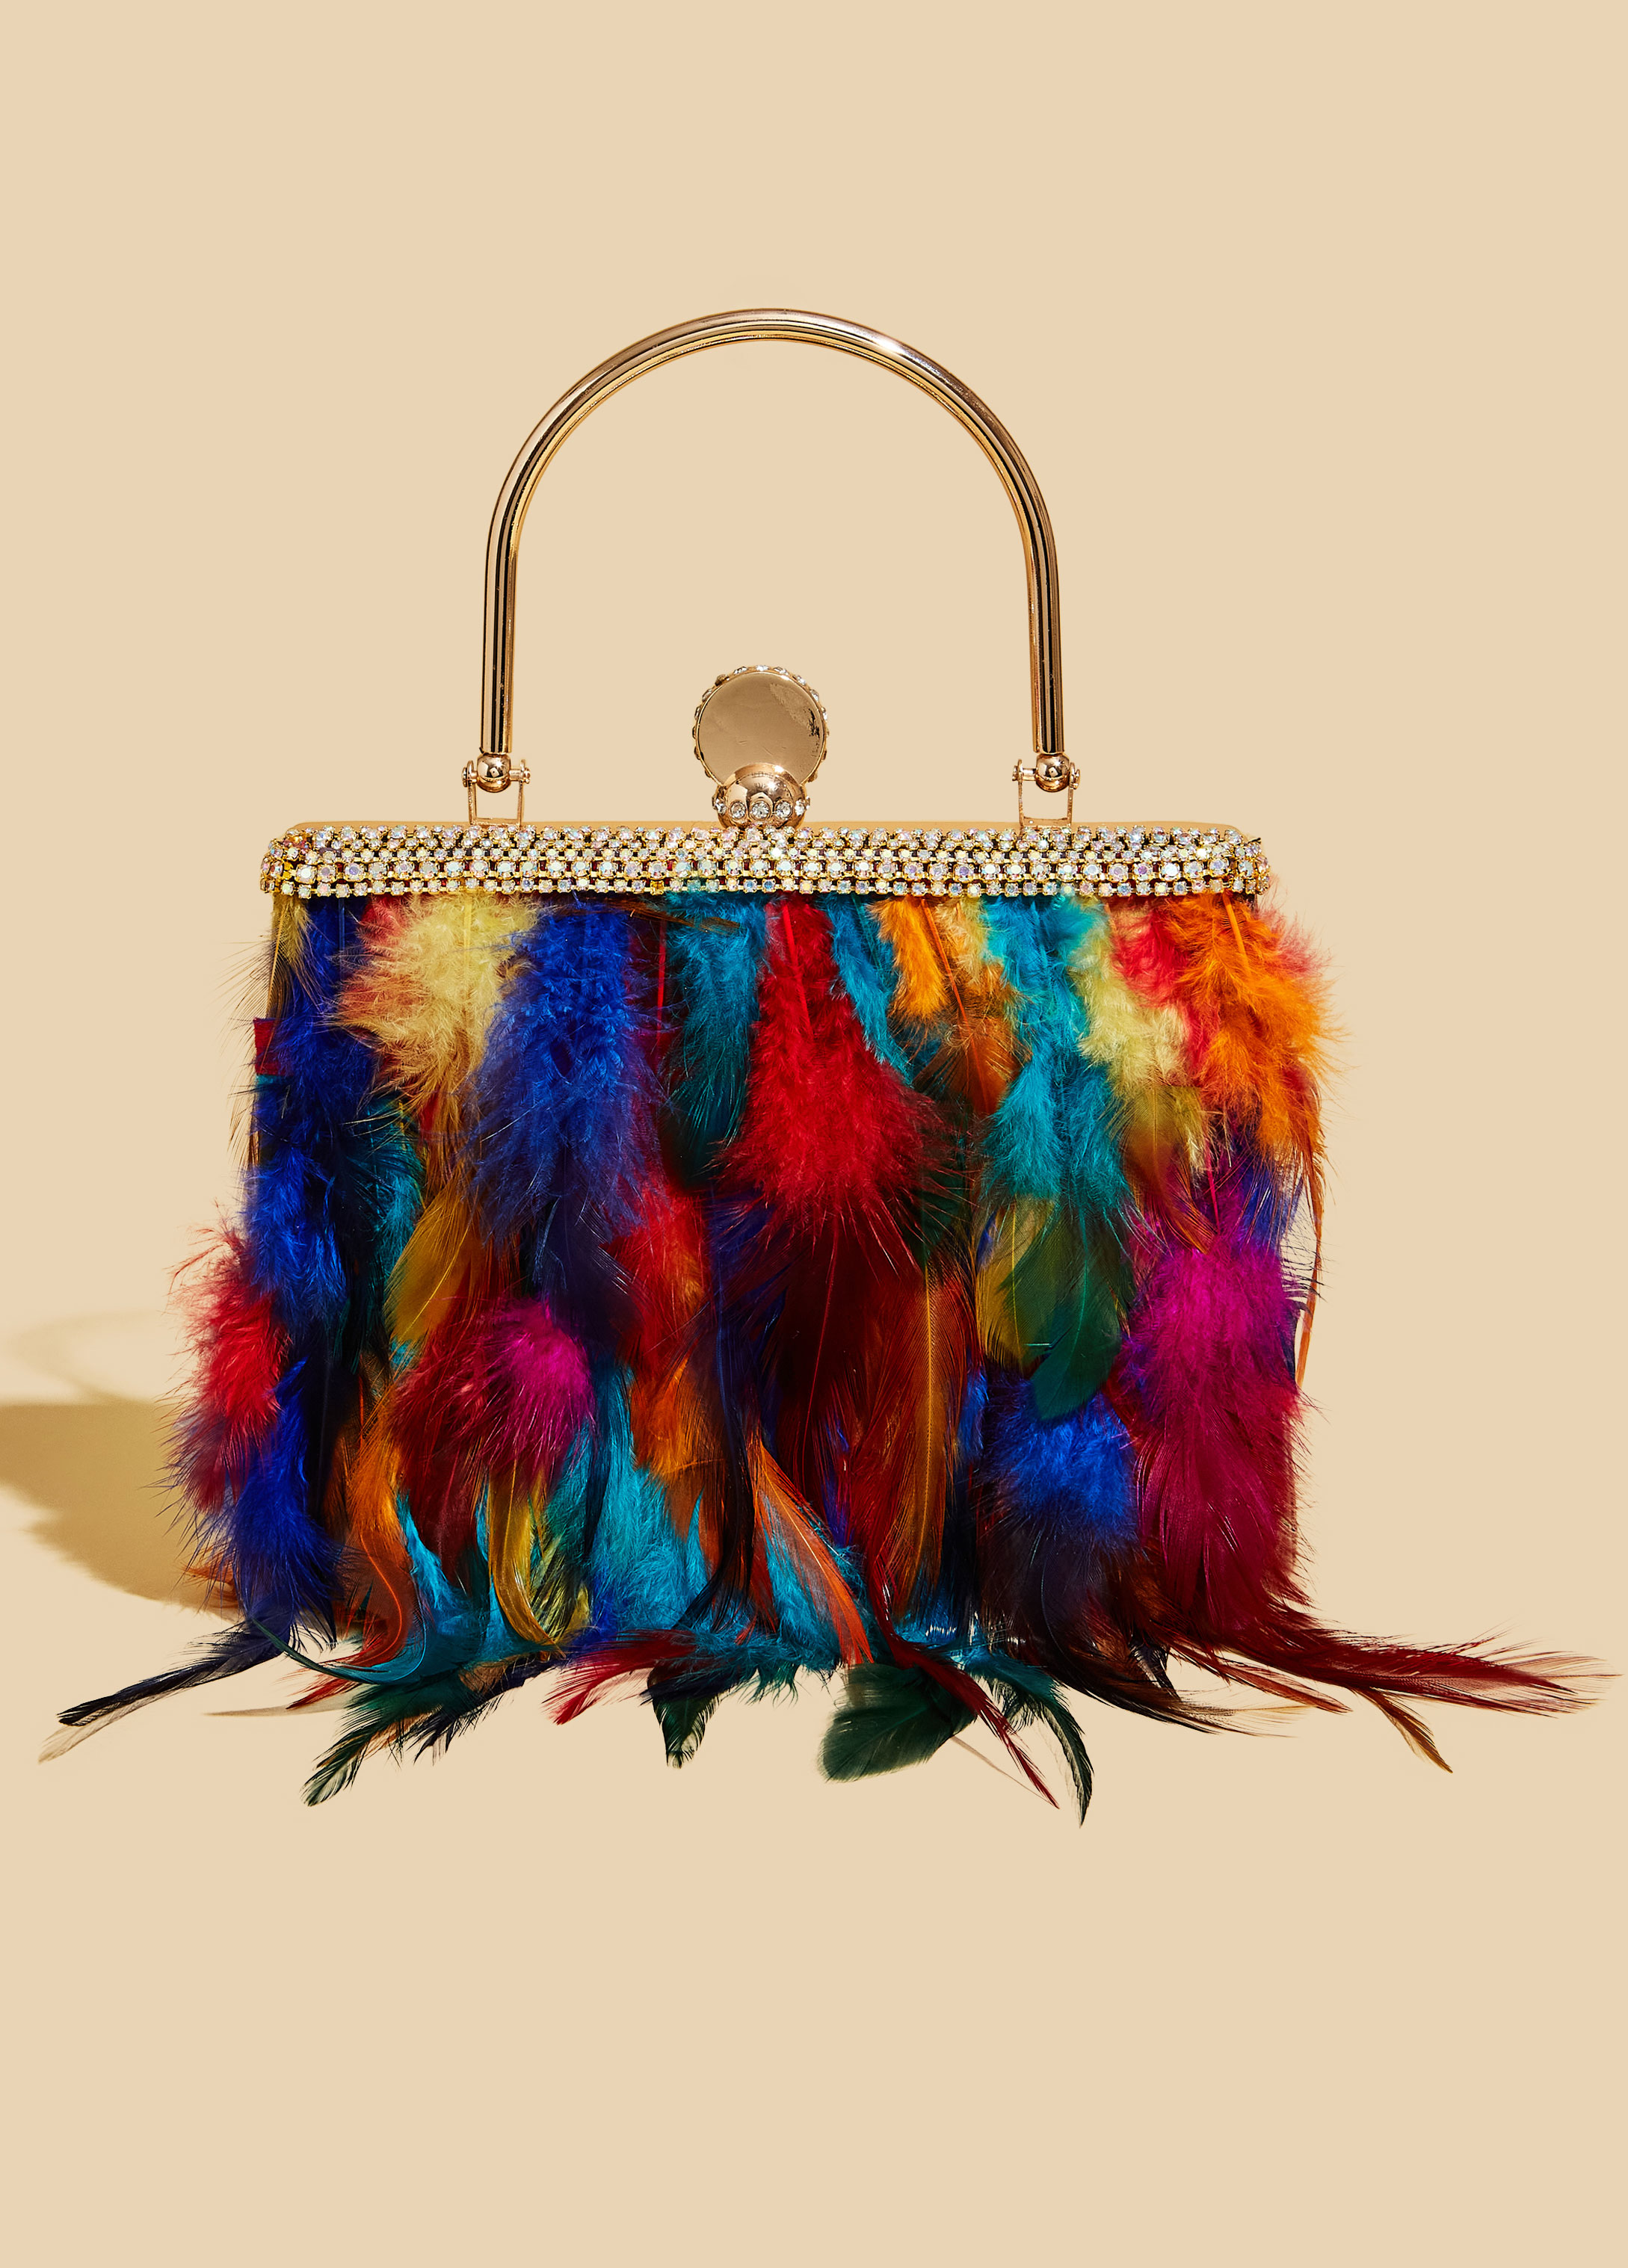 12 Types Of Handbags Every Woman Must Own | LBB